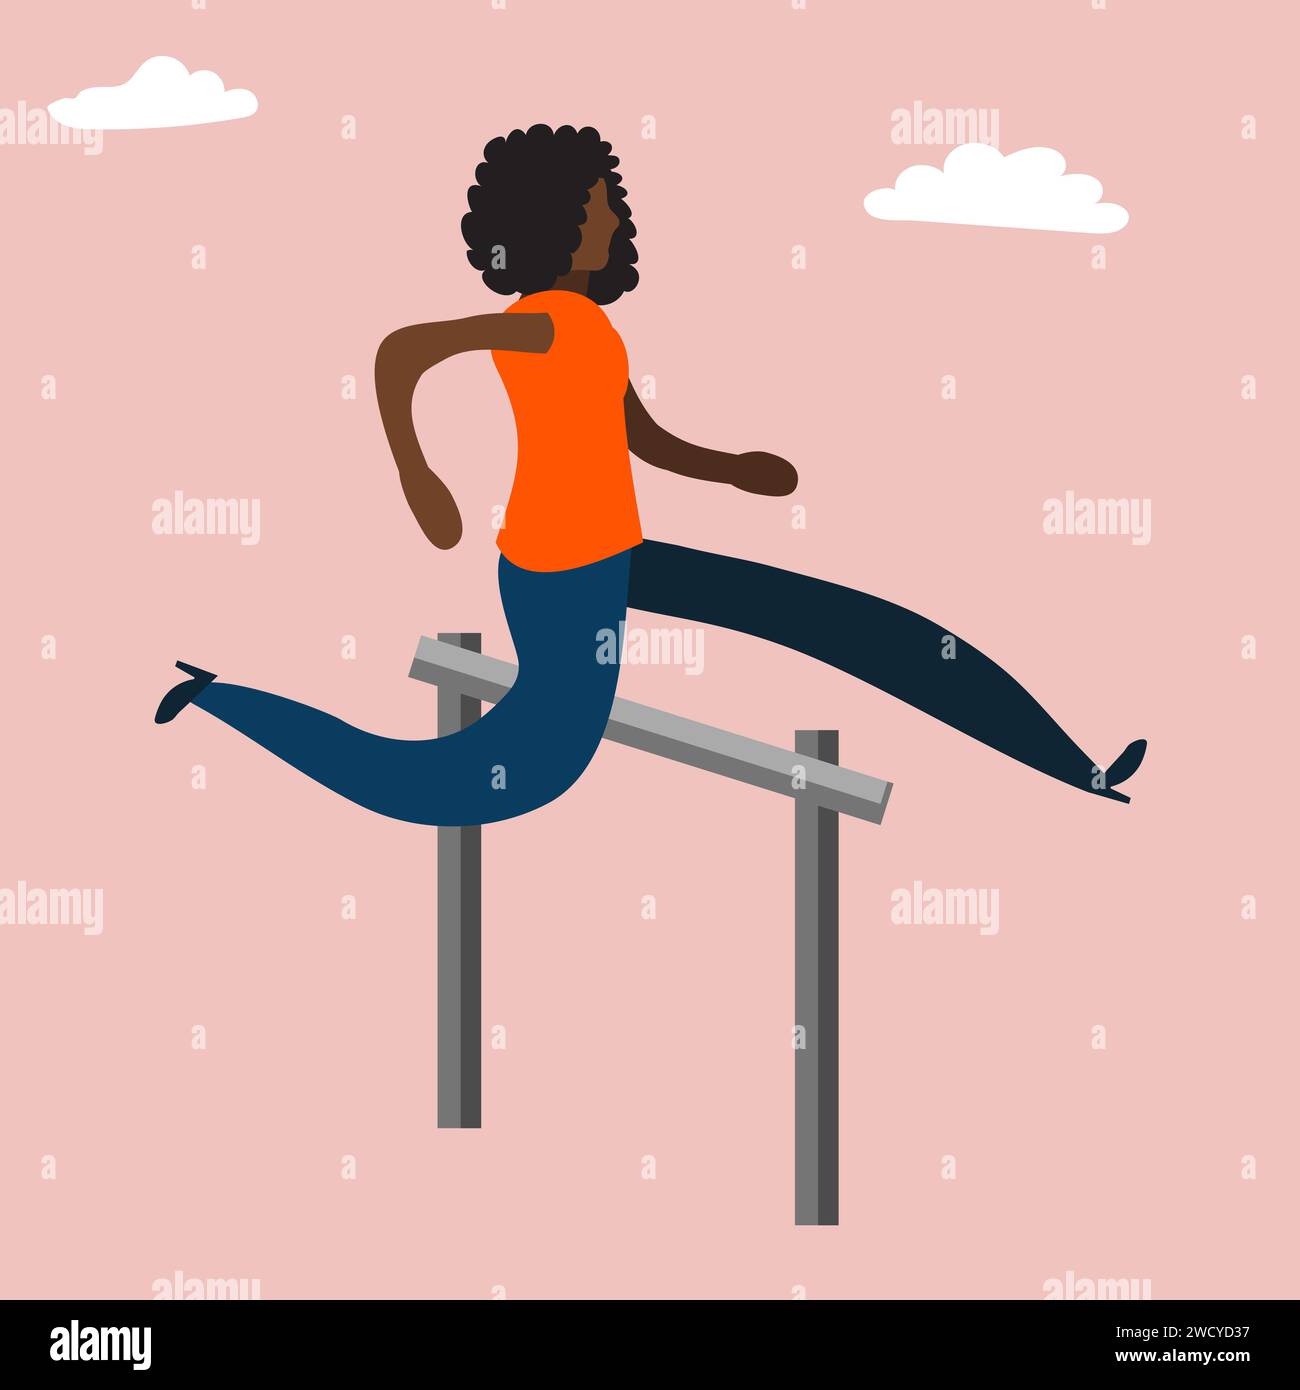 Overcoming Hurdles, Obstacles.  Business person overcoming obstacles in the workplace concept.  Woman beating a challenge or problem concept Stock Vector